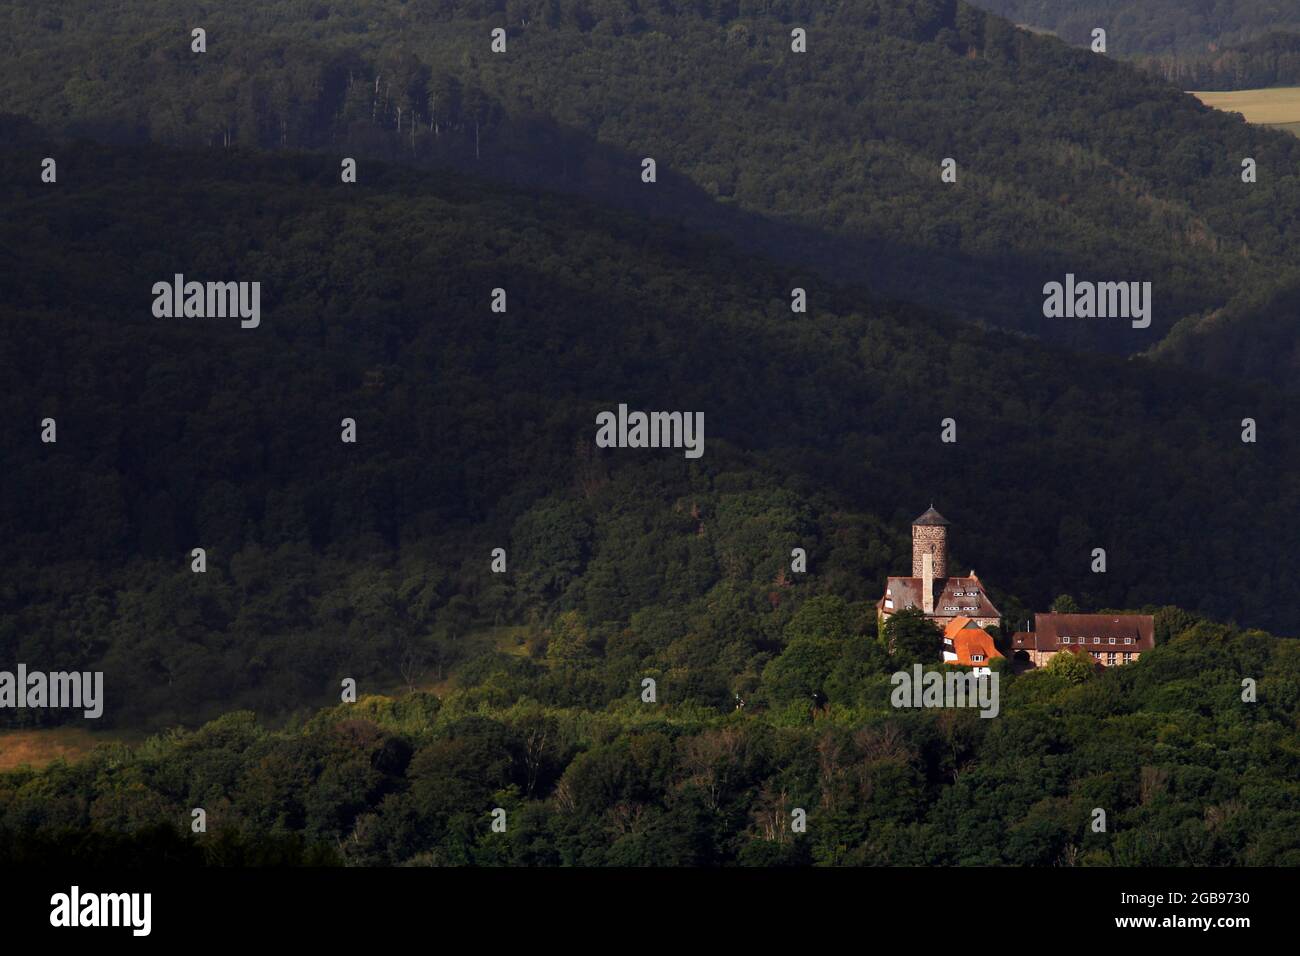 View from Bornhagen to Ludwigstein Castle in the Werra-Meissner district in Hesse, late medieval castle surrounded by forests of the Werra Mountains Stock Photo